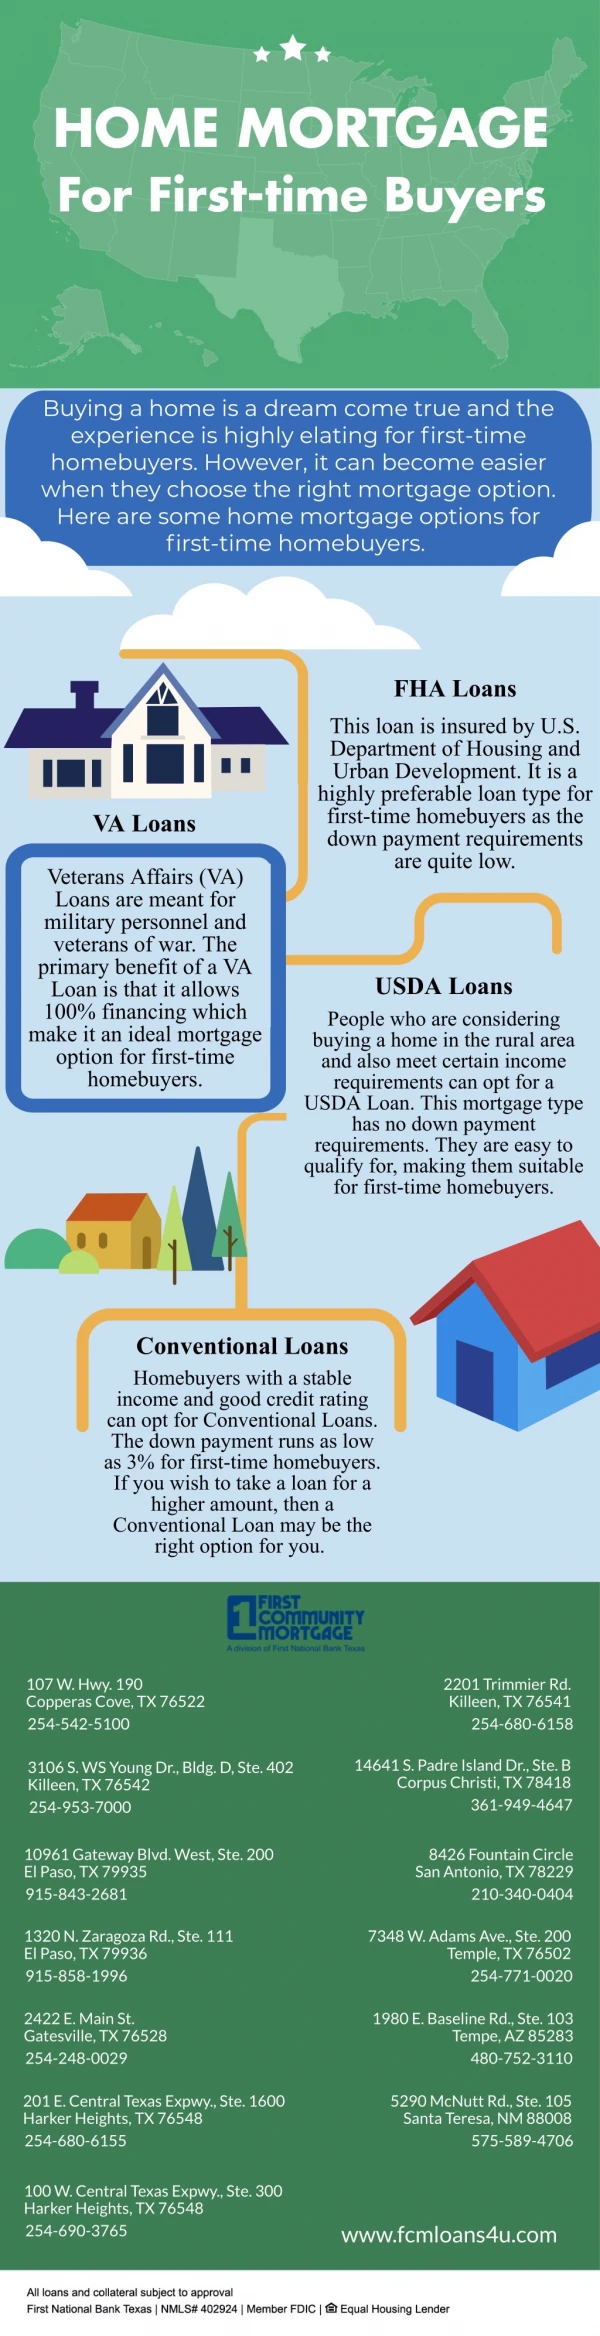 Home Mortgage Options For First-time Buyers